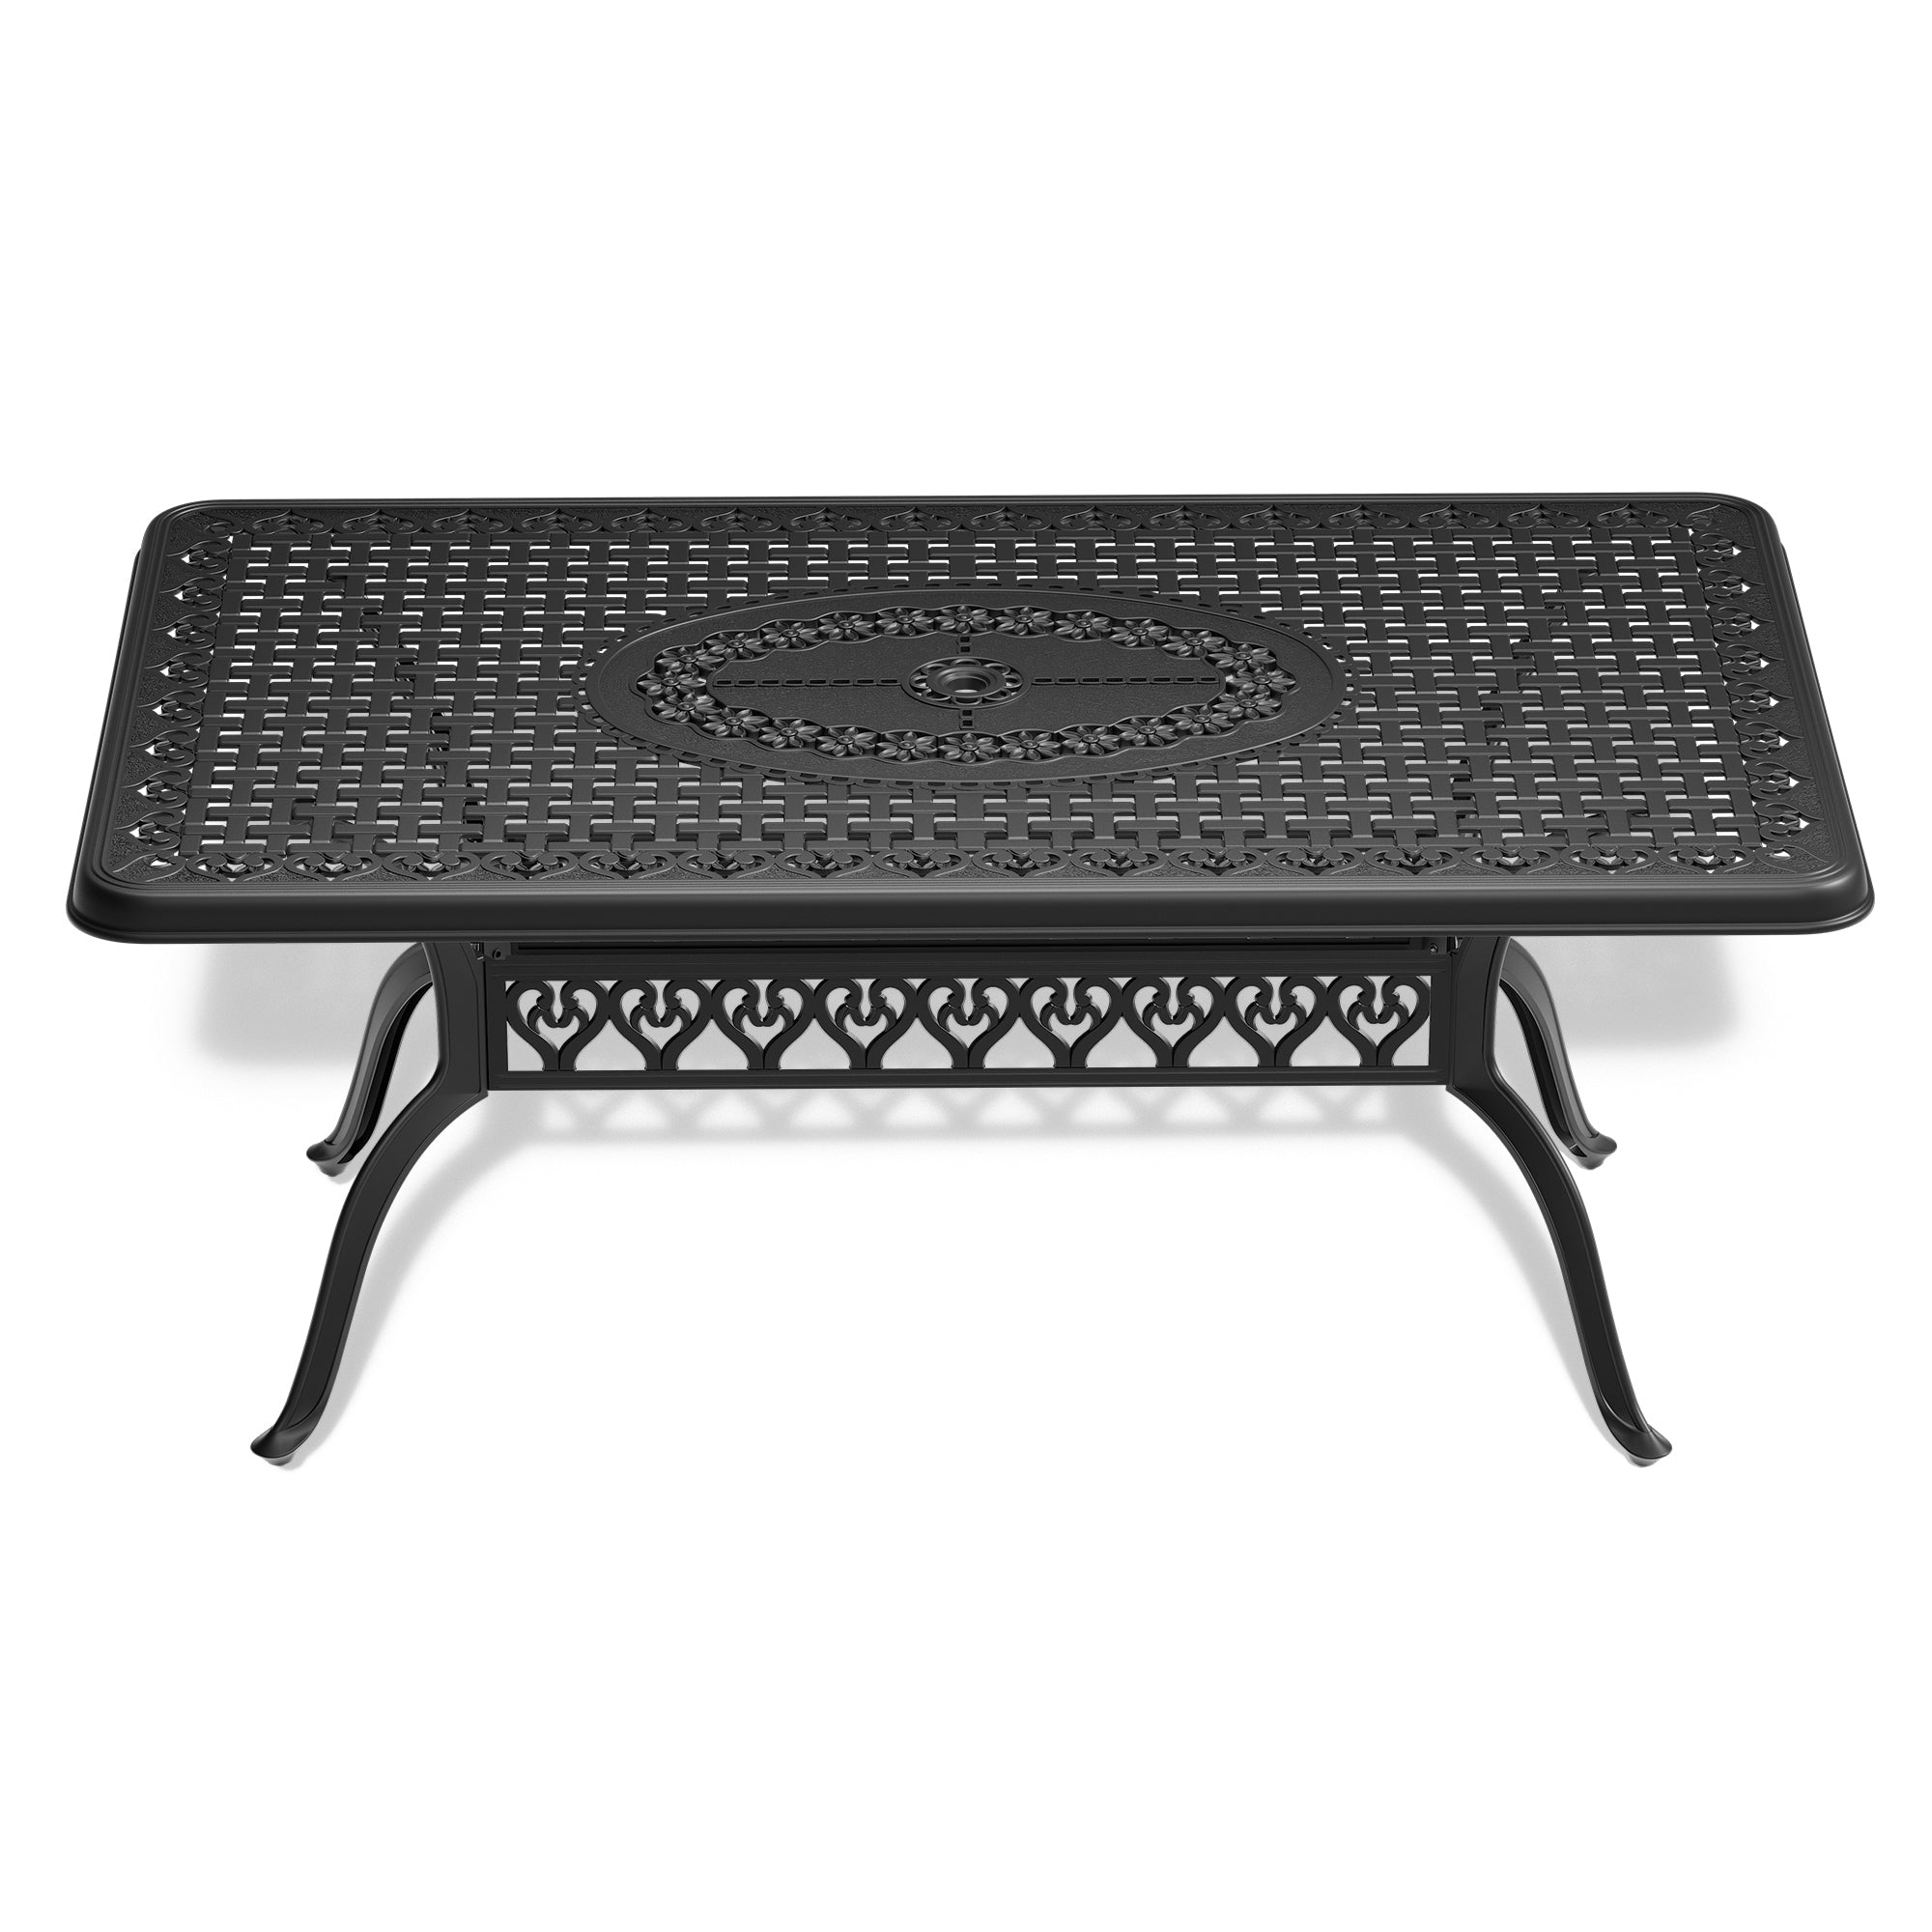 L68.9*w37.4 inch Cast Aluminum Patio Dining Table